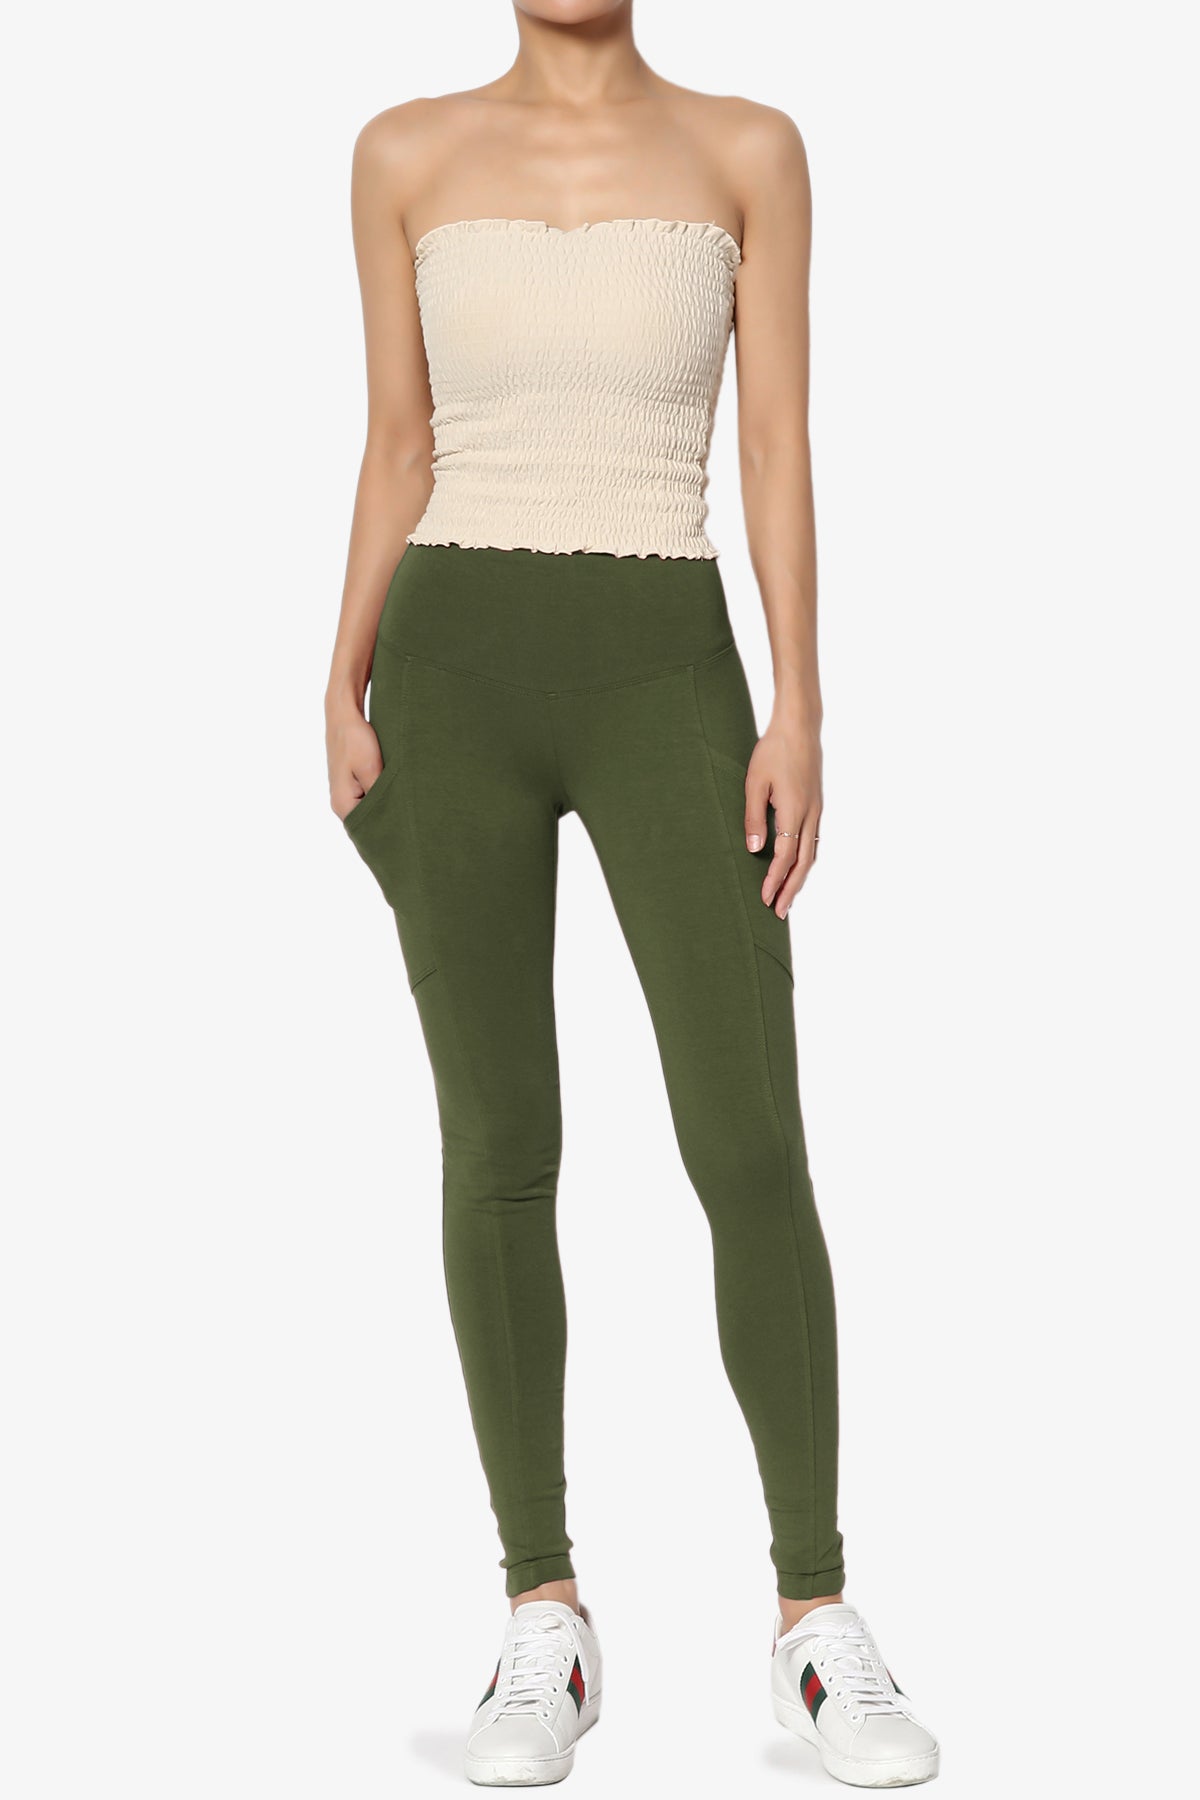 Ansley Luxe Cotton Leggings with Pockets ARMY GREEN_6